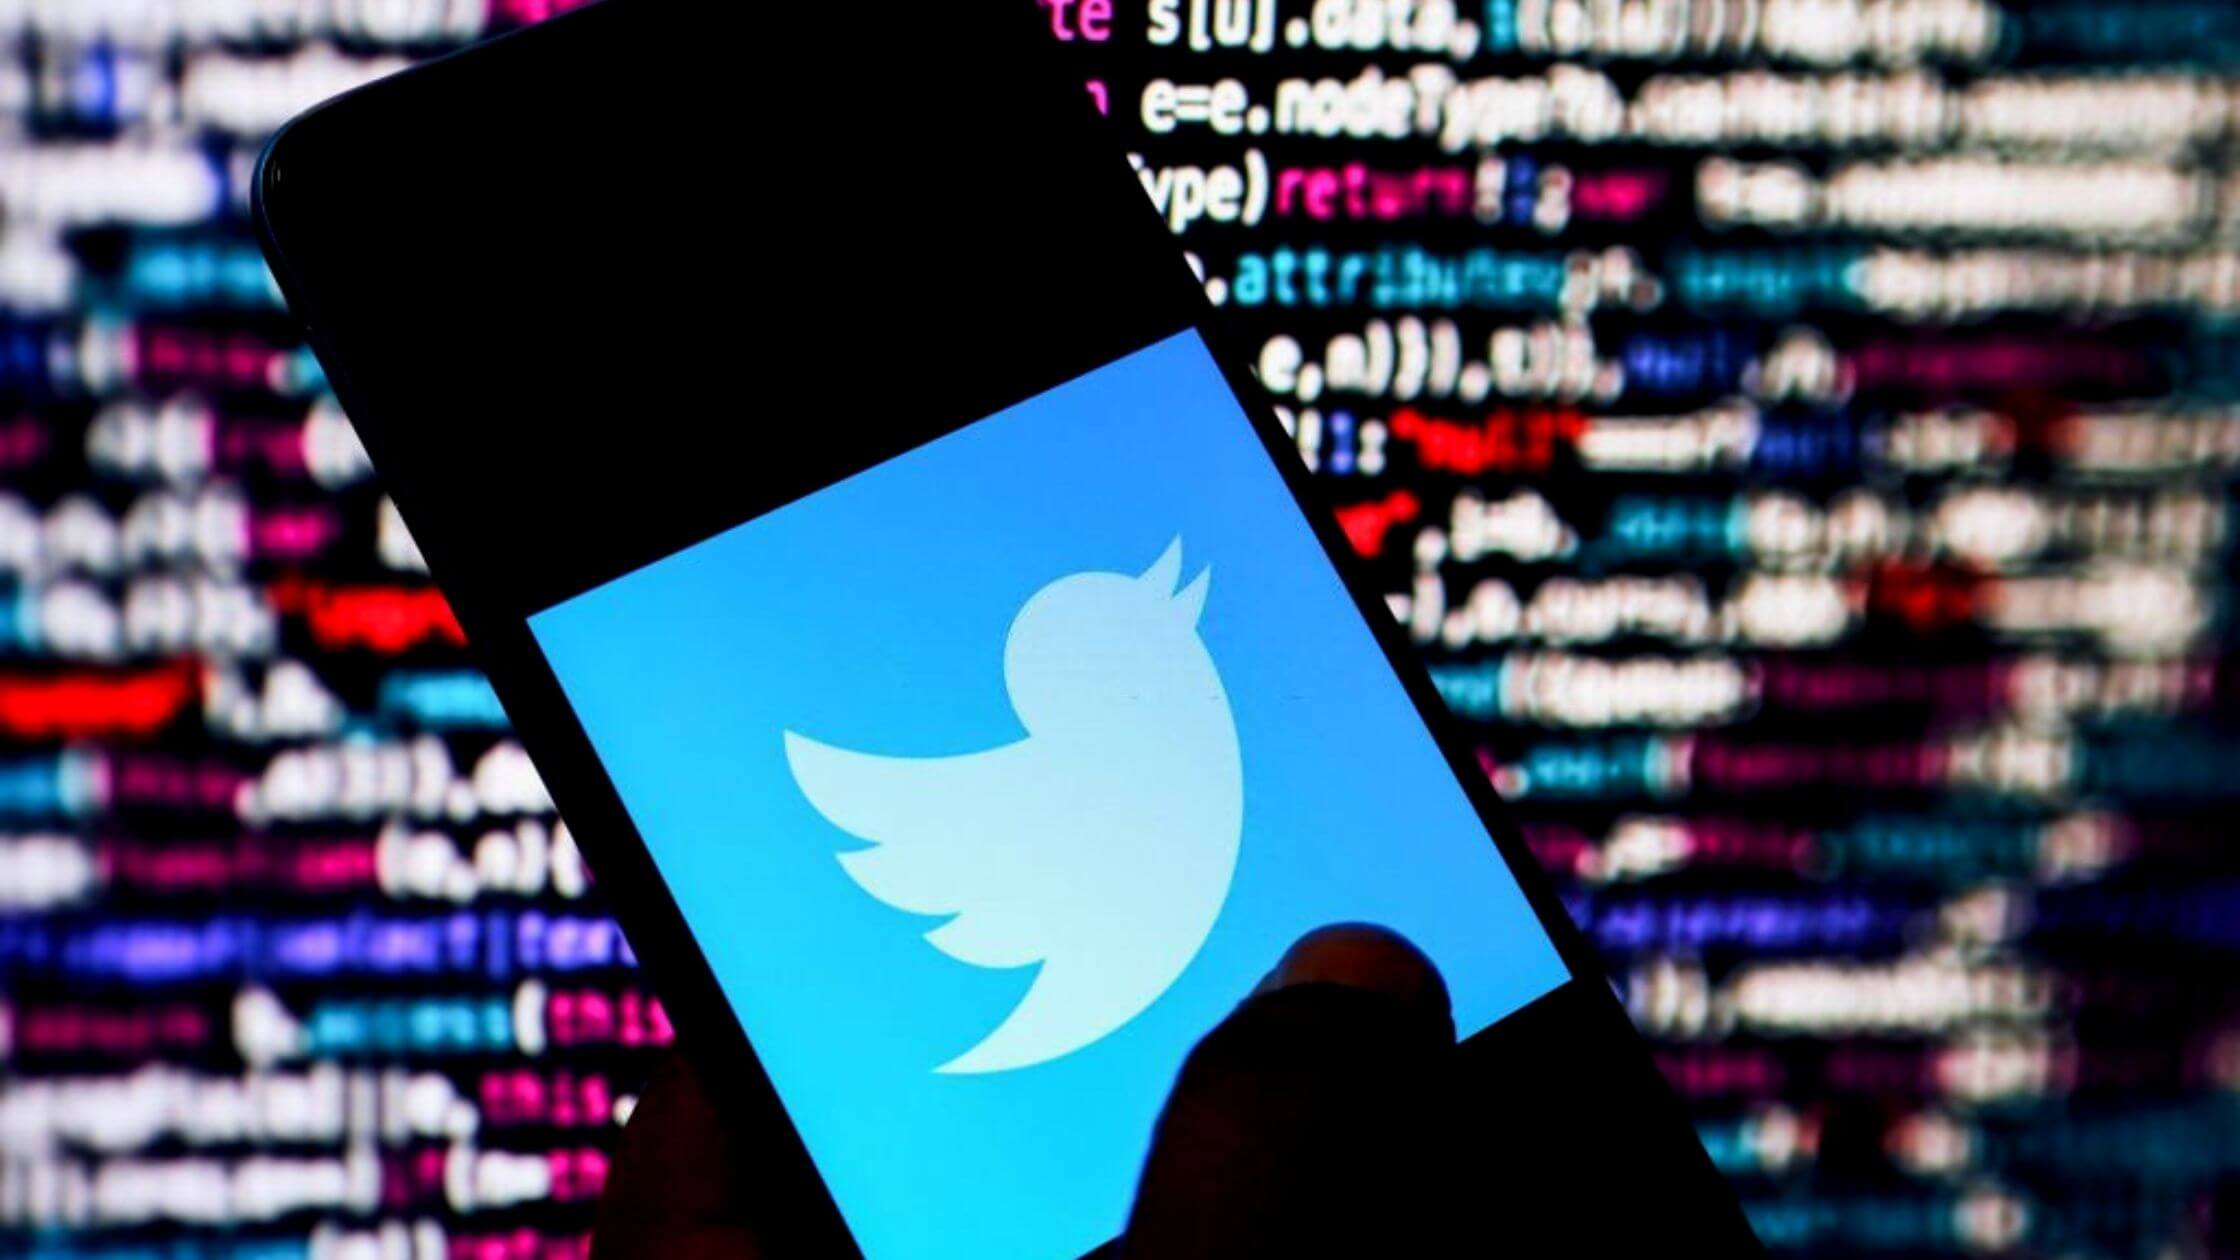 Twitter Removes Paid Verification After Impersonators Proliferated